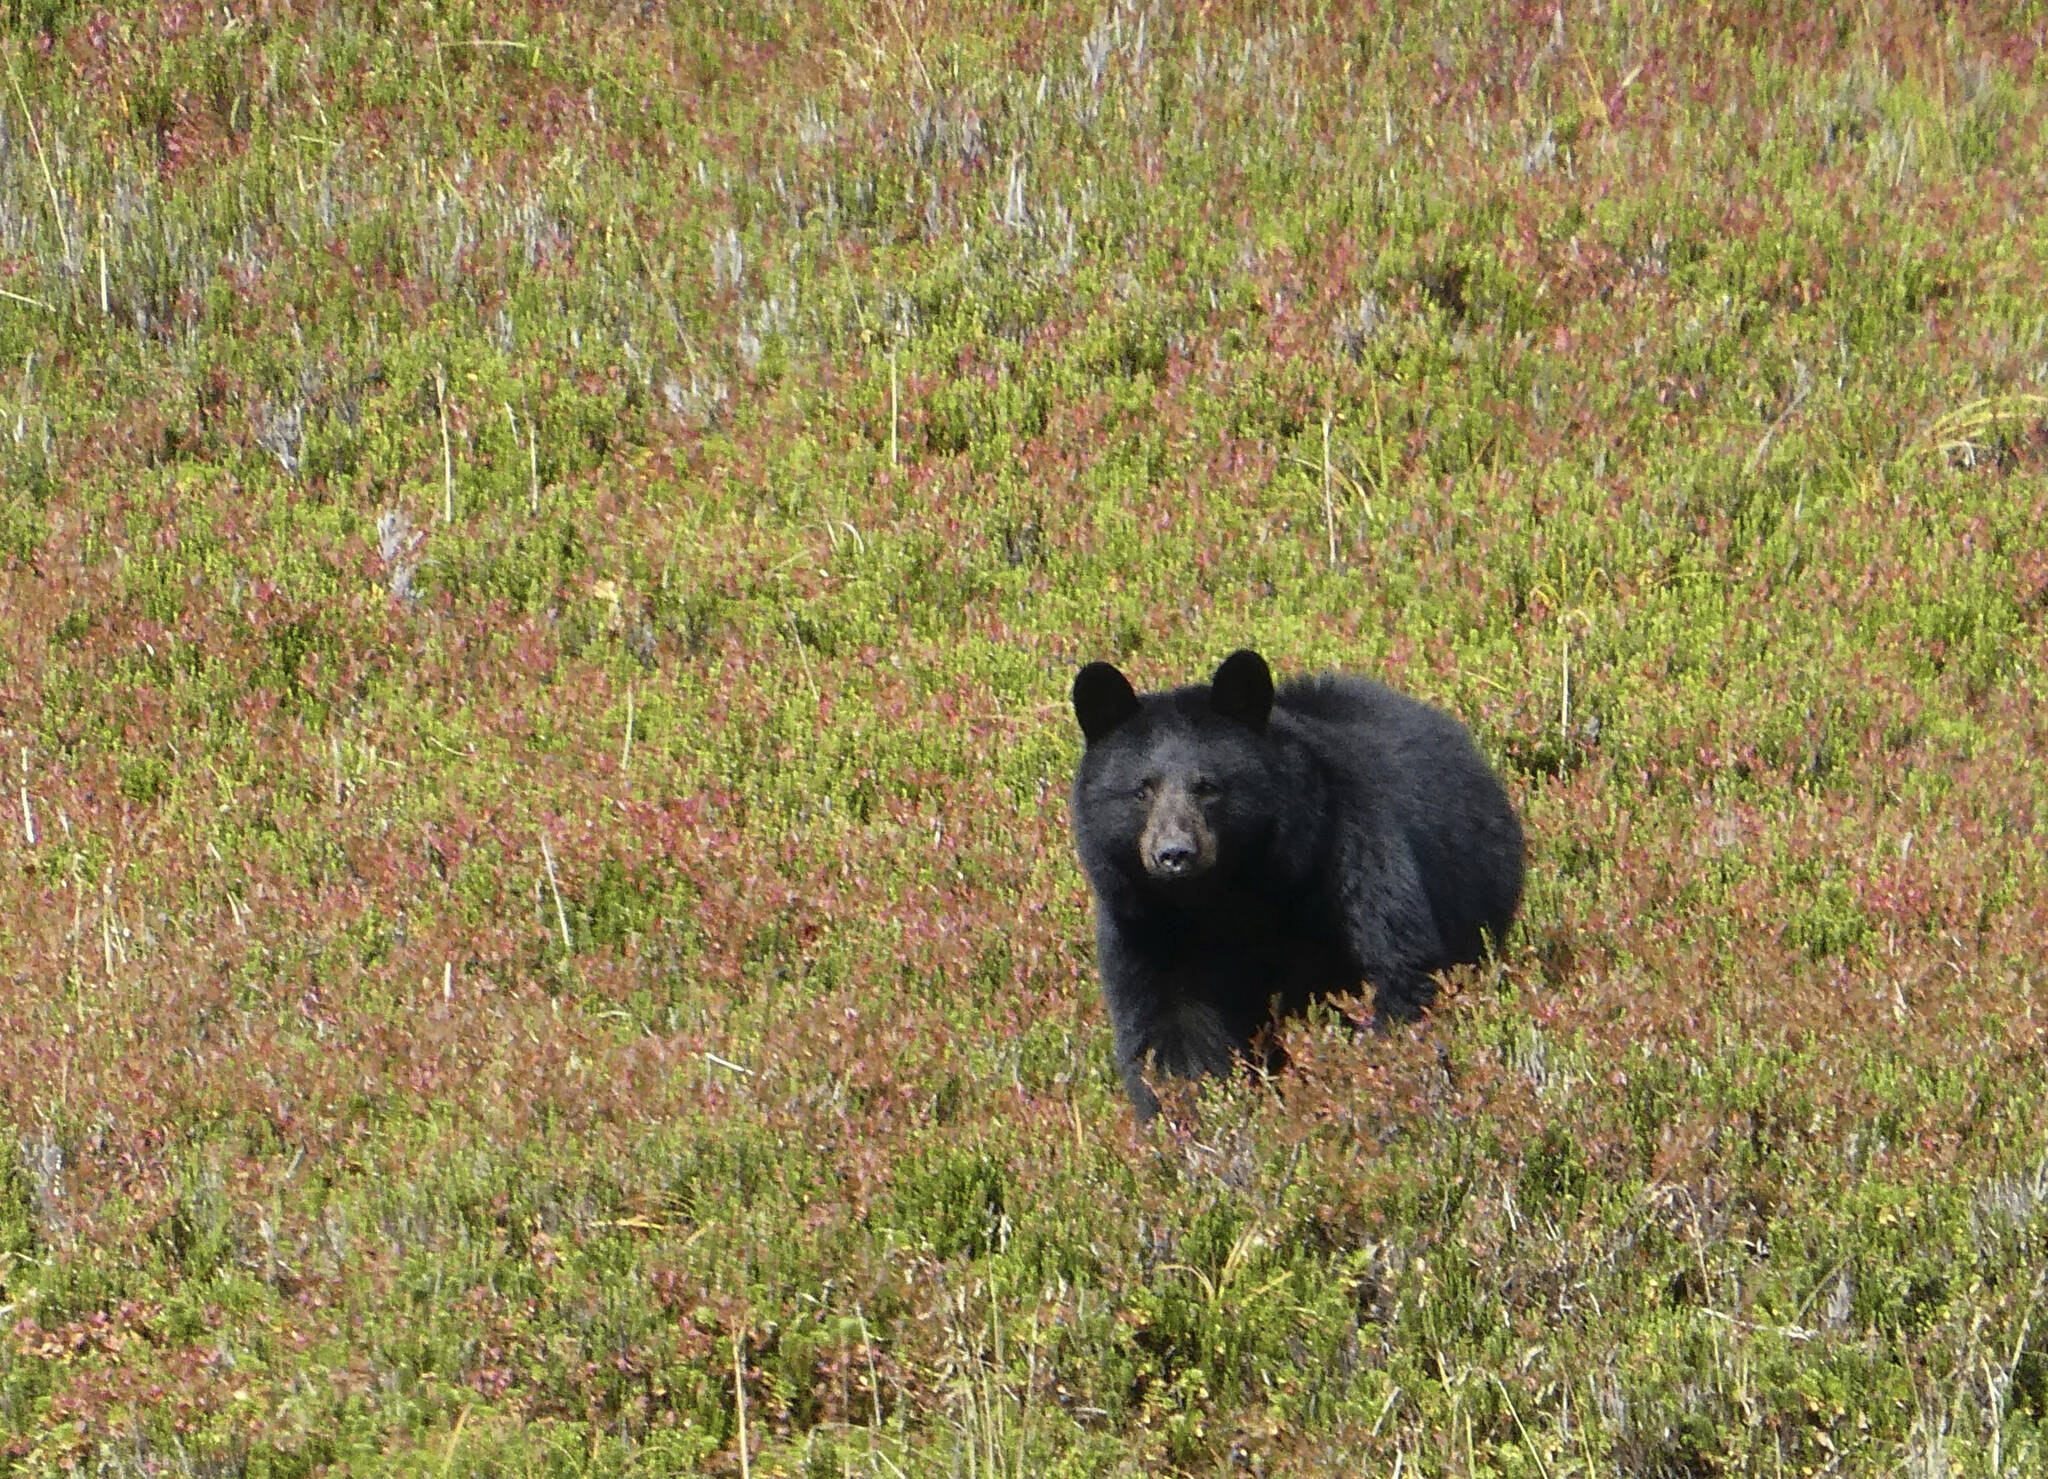 In this Wednesday, Oct. 4, 2017 photo, a black bear checks out his surroundings in Granite Basin in Juneau, Alaska. The National Park Service is proposing a rule that would prohibit bear baiting in national preserves in Alaska, the latest in a dispute over what animal rights supporters call a cruel practice. The park service said Friday, Jan. 6, 2023 it is proposing a rule barring bear baiting in national preserves in Alaska. (AP Photo/Becky Bohrer, File)